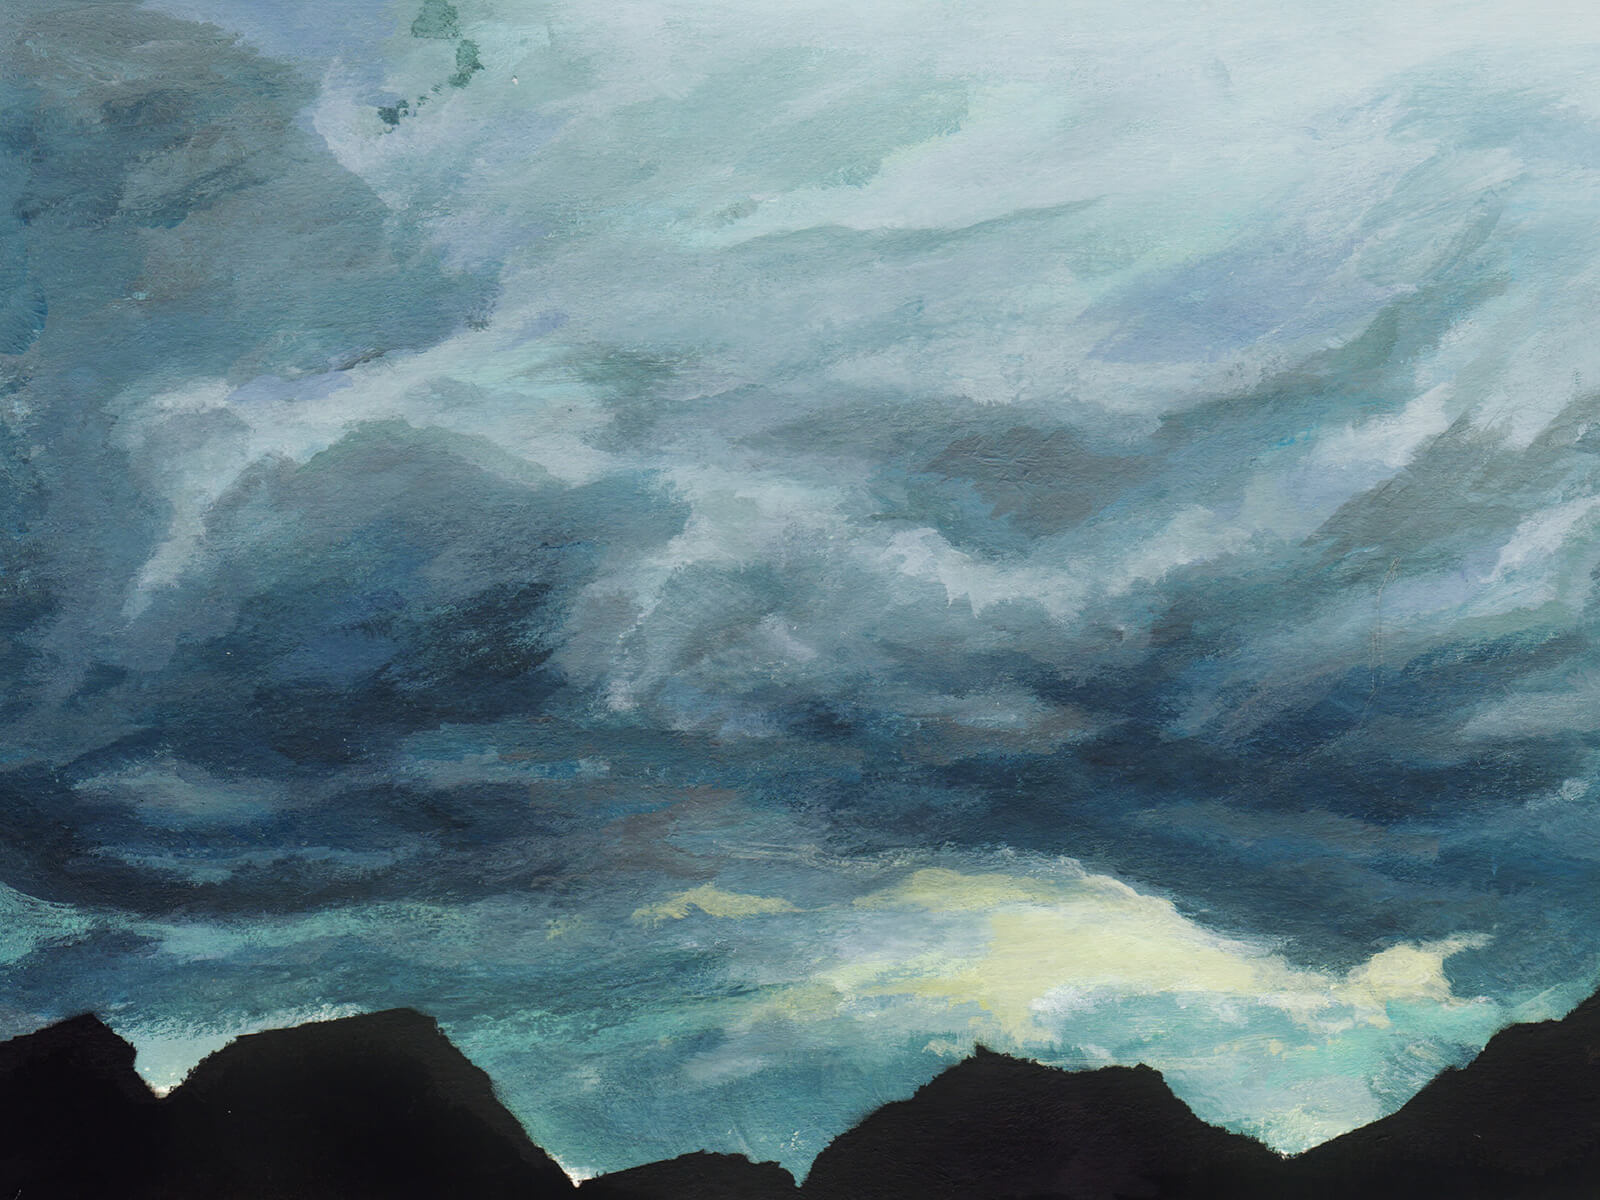 Painting of gathering gray-blue storm clouds above black mountain peaks.